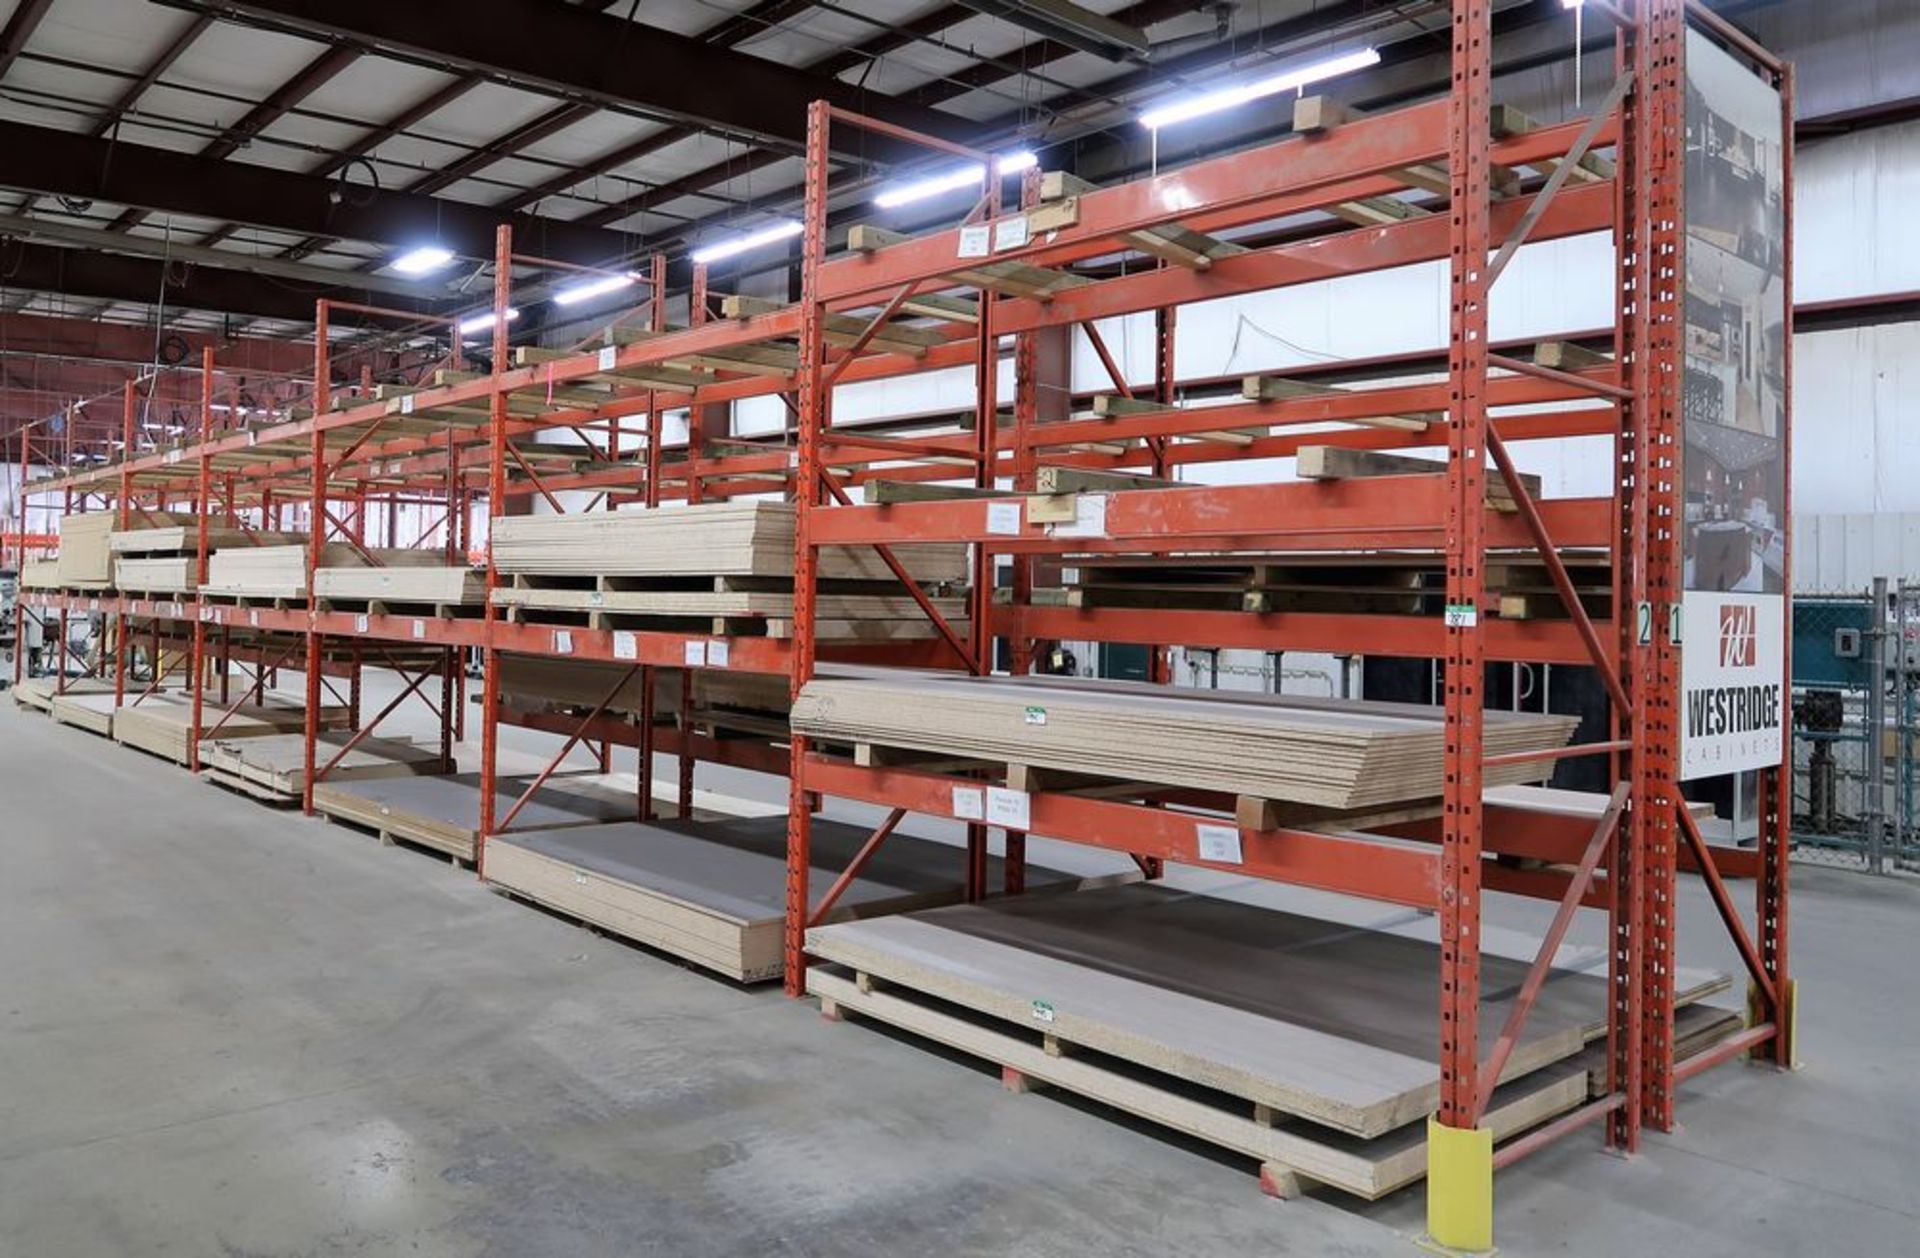 7 SECTIONS OF 12' HIGH PALLET RACKING, 9' SECTIONS